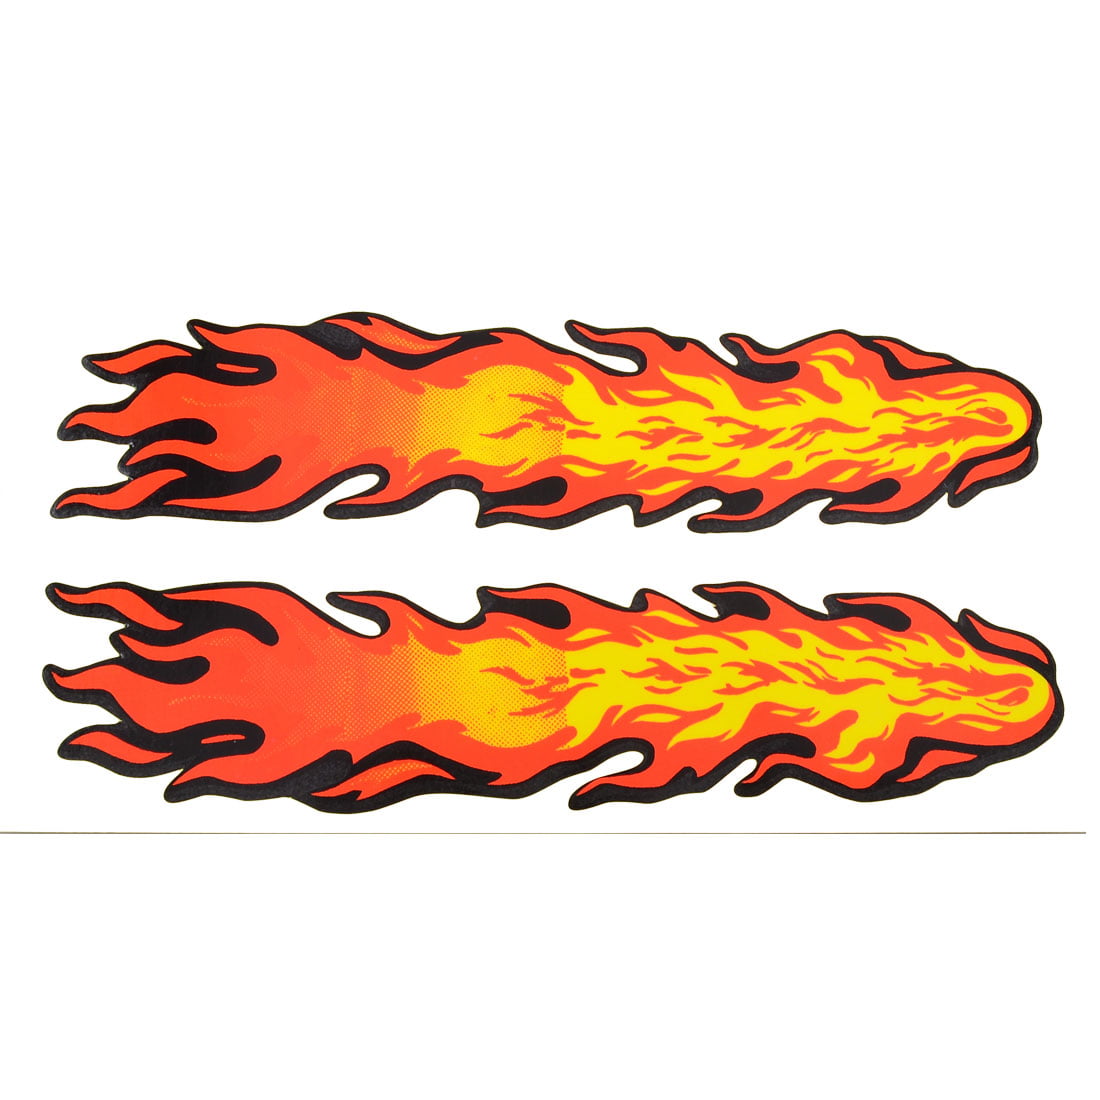 Collection 99+ Pictures Flame Decals For Cars Full HD, 2k, 4k